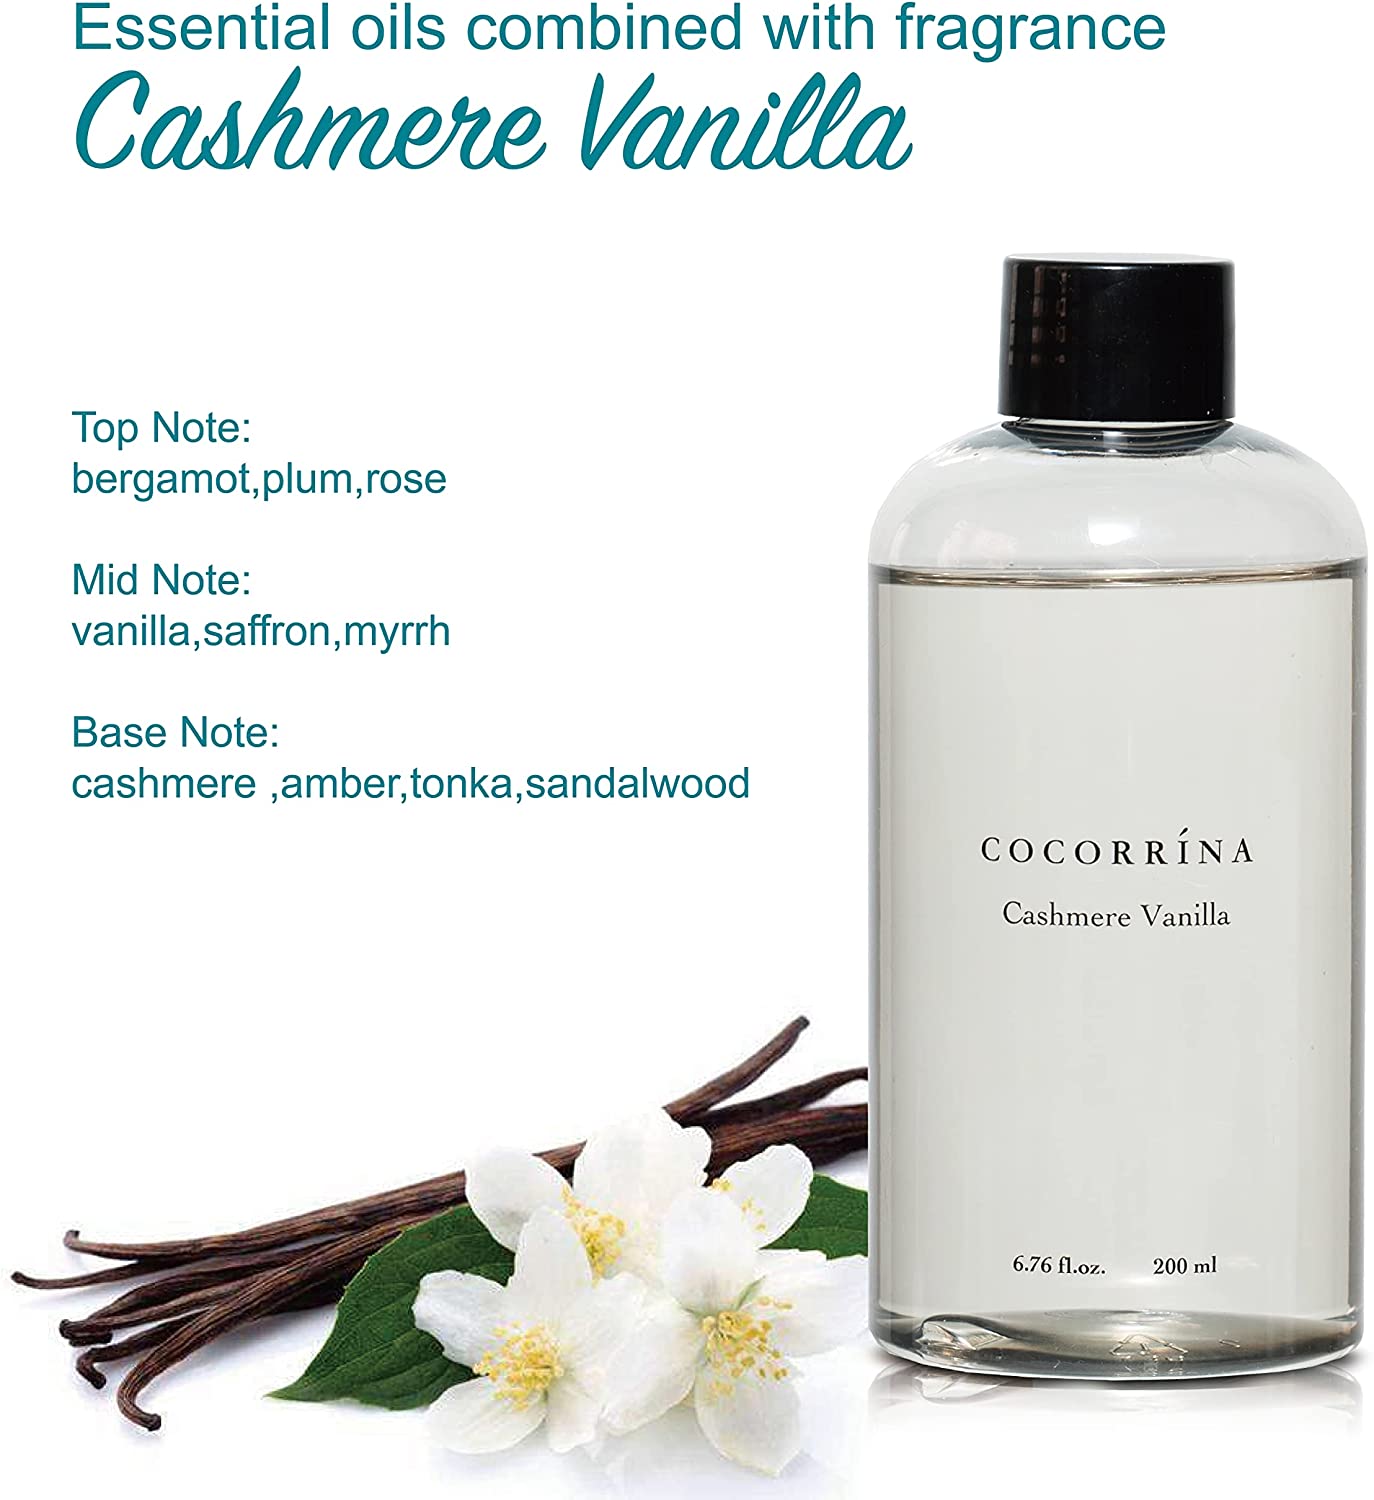 Cocorrína Cashmere Vanilla Scented Reed Diffuser Oil Refill with 6